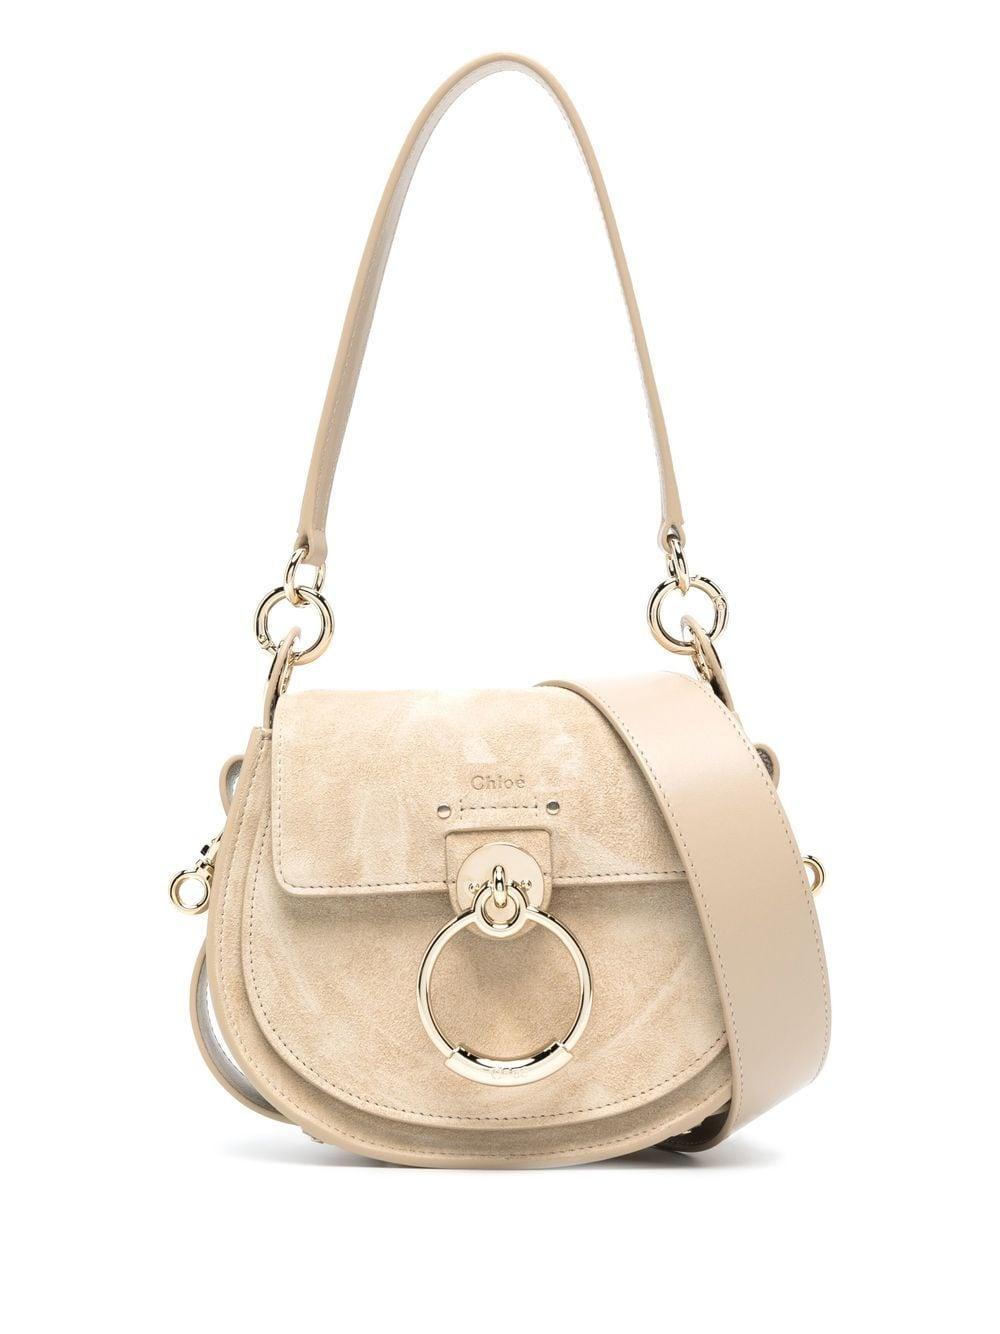 Chloé Tess Suede Crossbody Bag in Natural | Lyst